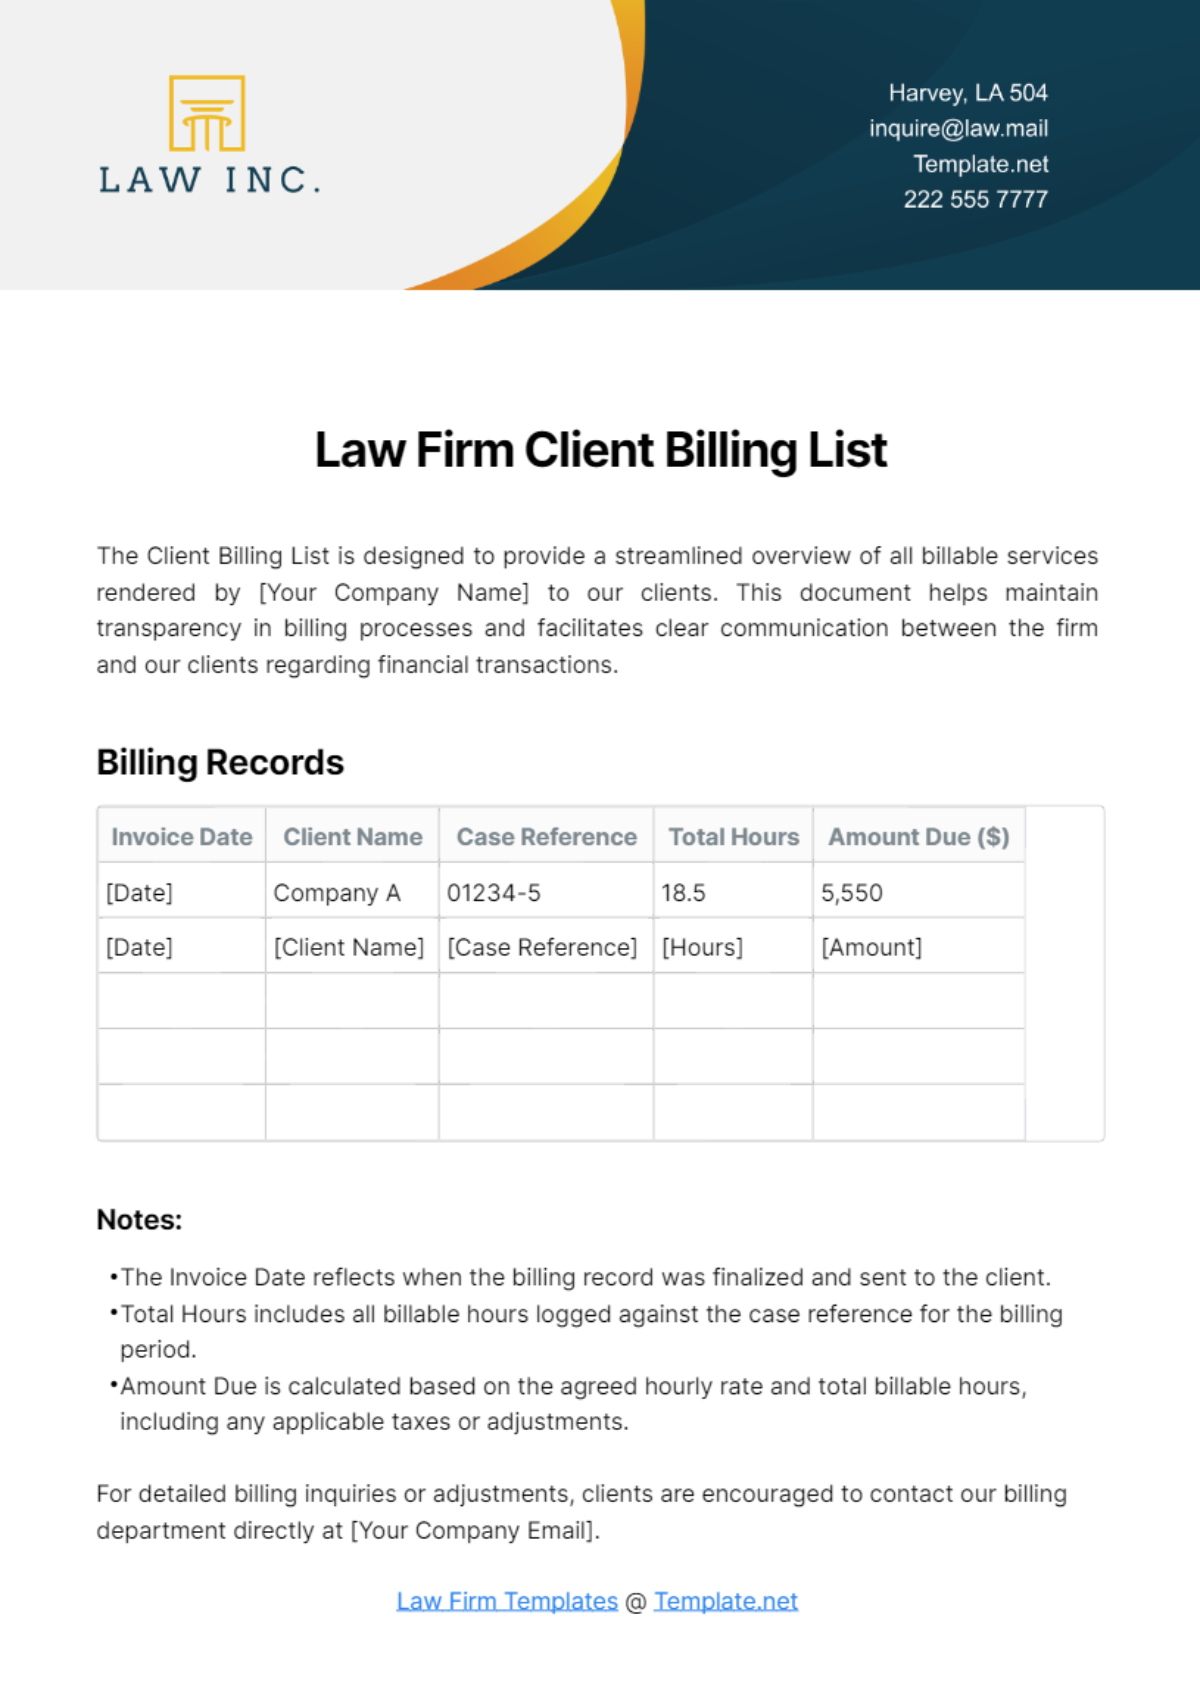 Free Law Firm Client Billing List Template